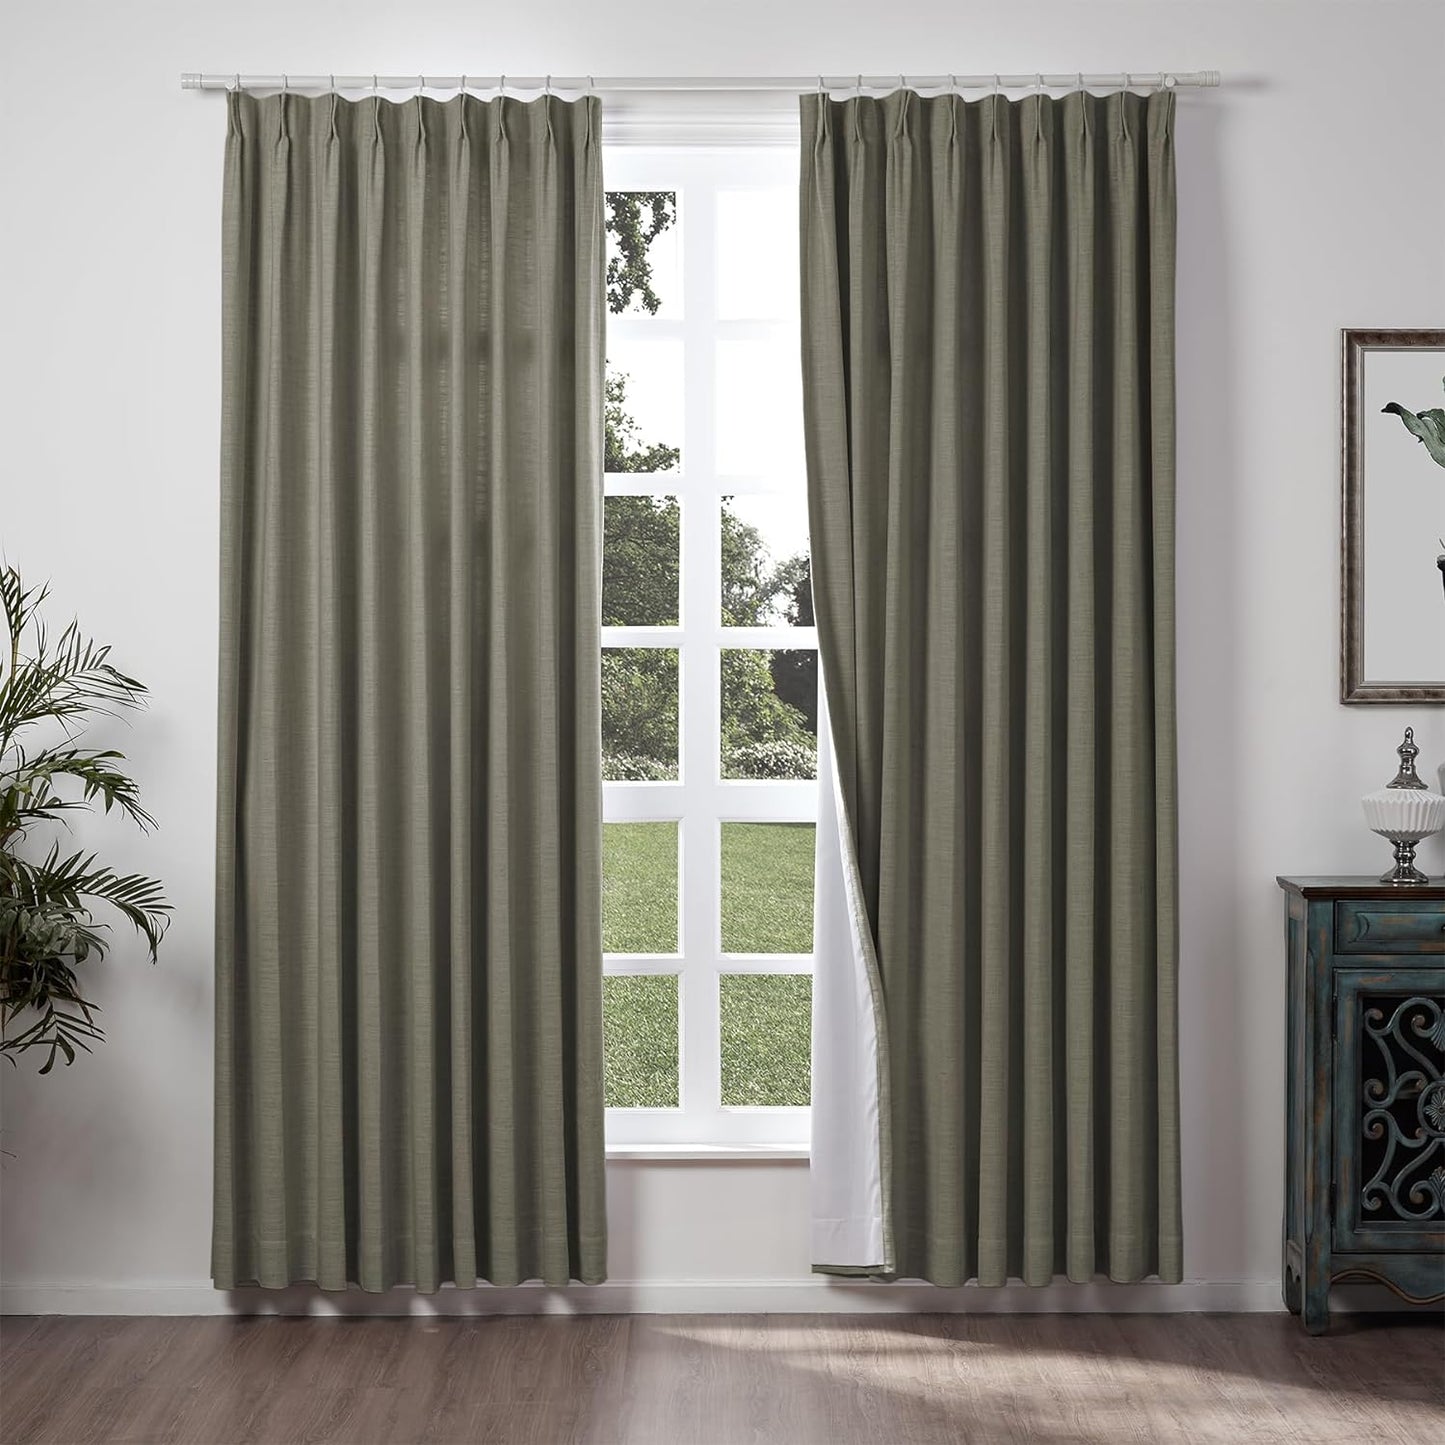 Chadmade 50" W X 63" L Polyester Linen Drape with Blackout Lining Pinch Pleat Curtain for Sliding Door Patio Door Living Room Bedroom, (1 Panel) Sand Beige Tallis Collection  ChadMade Sepia (14) 120Wx96L 